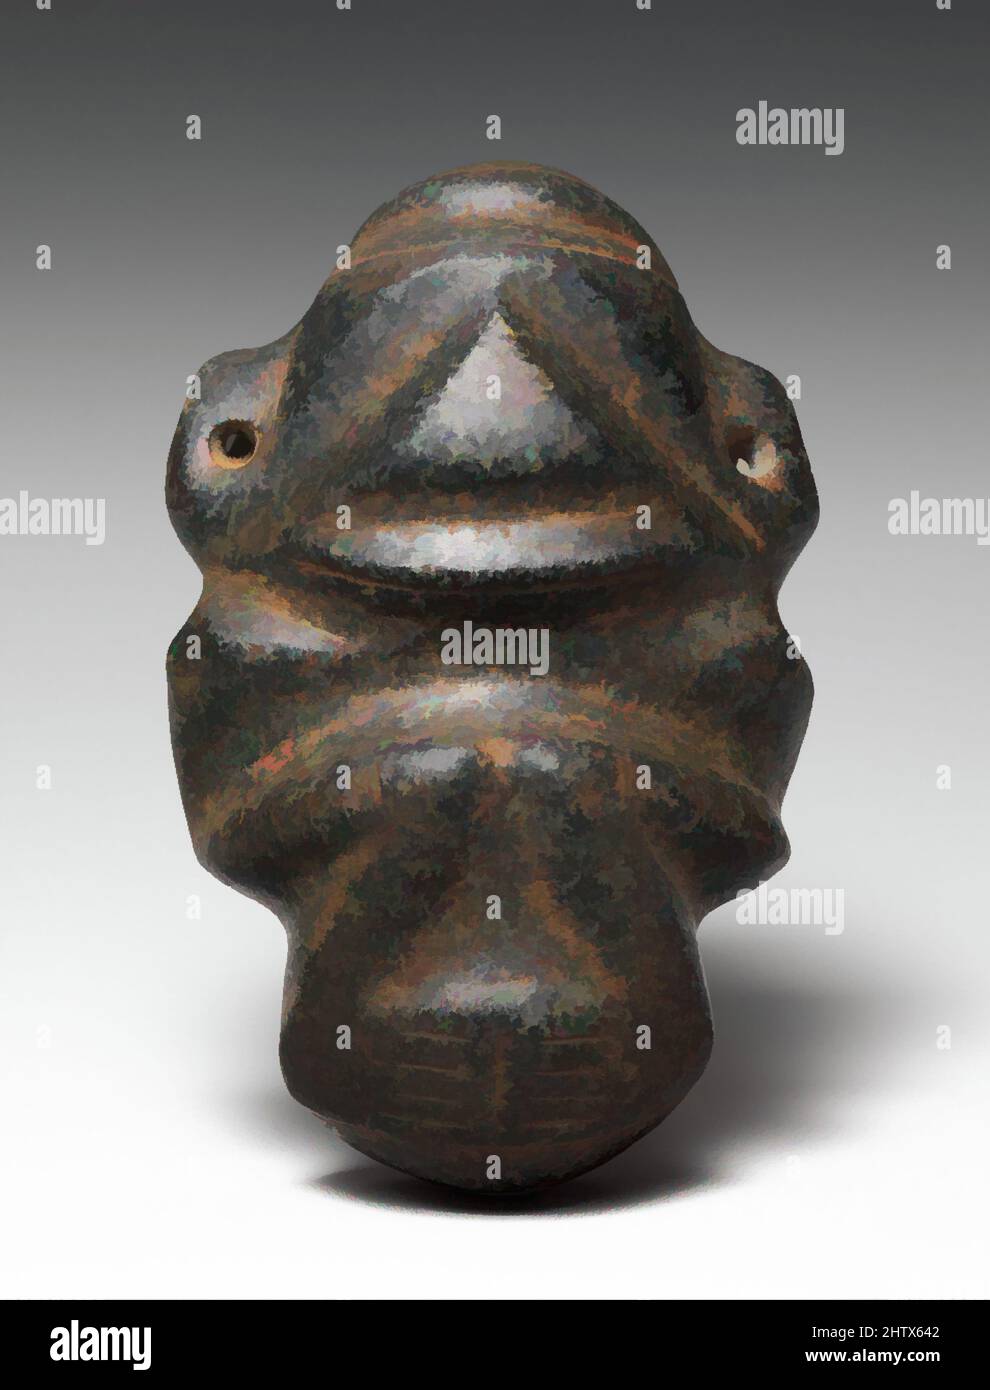 Art inspired by Figure, 13th–15th century, Dominican Republic, Caribbean, Taino, Diorite or granodiorite, Height 4-1/4 in. (10.8 cm), Stone-Sculpture, The image of a kneeling or crouching figure is a pervasive one in Taino art. Even in sculptures that are almost flat, such as this wide, Classic works modernized by Artotop with a splash of modernity. Shapes, color and value, eye-catching visual impact on art. Emotions through freedom of artworks in a contemporary way. A timeless message pursuing a wildly creative new direction. Artists turning to the digital medium and creating the Artotop NFT Stock Photo